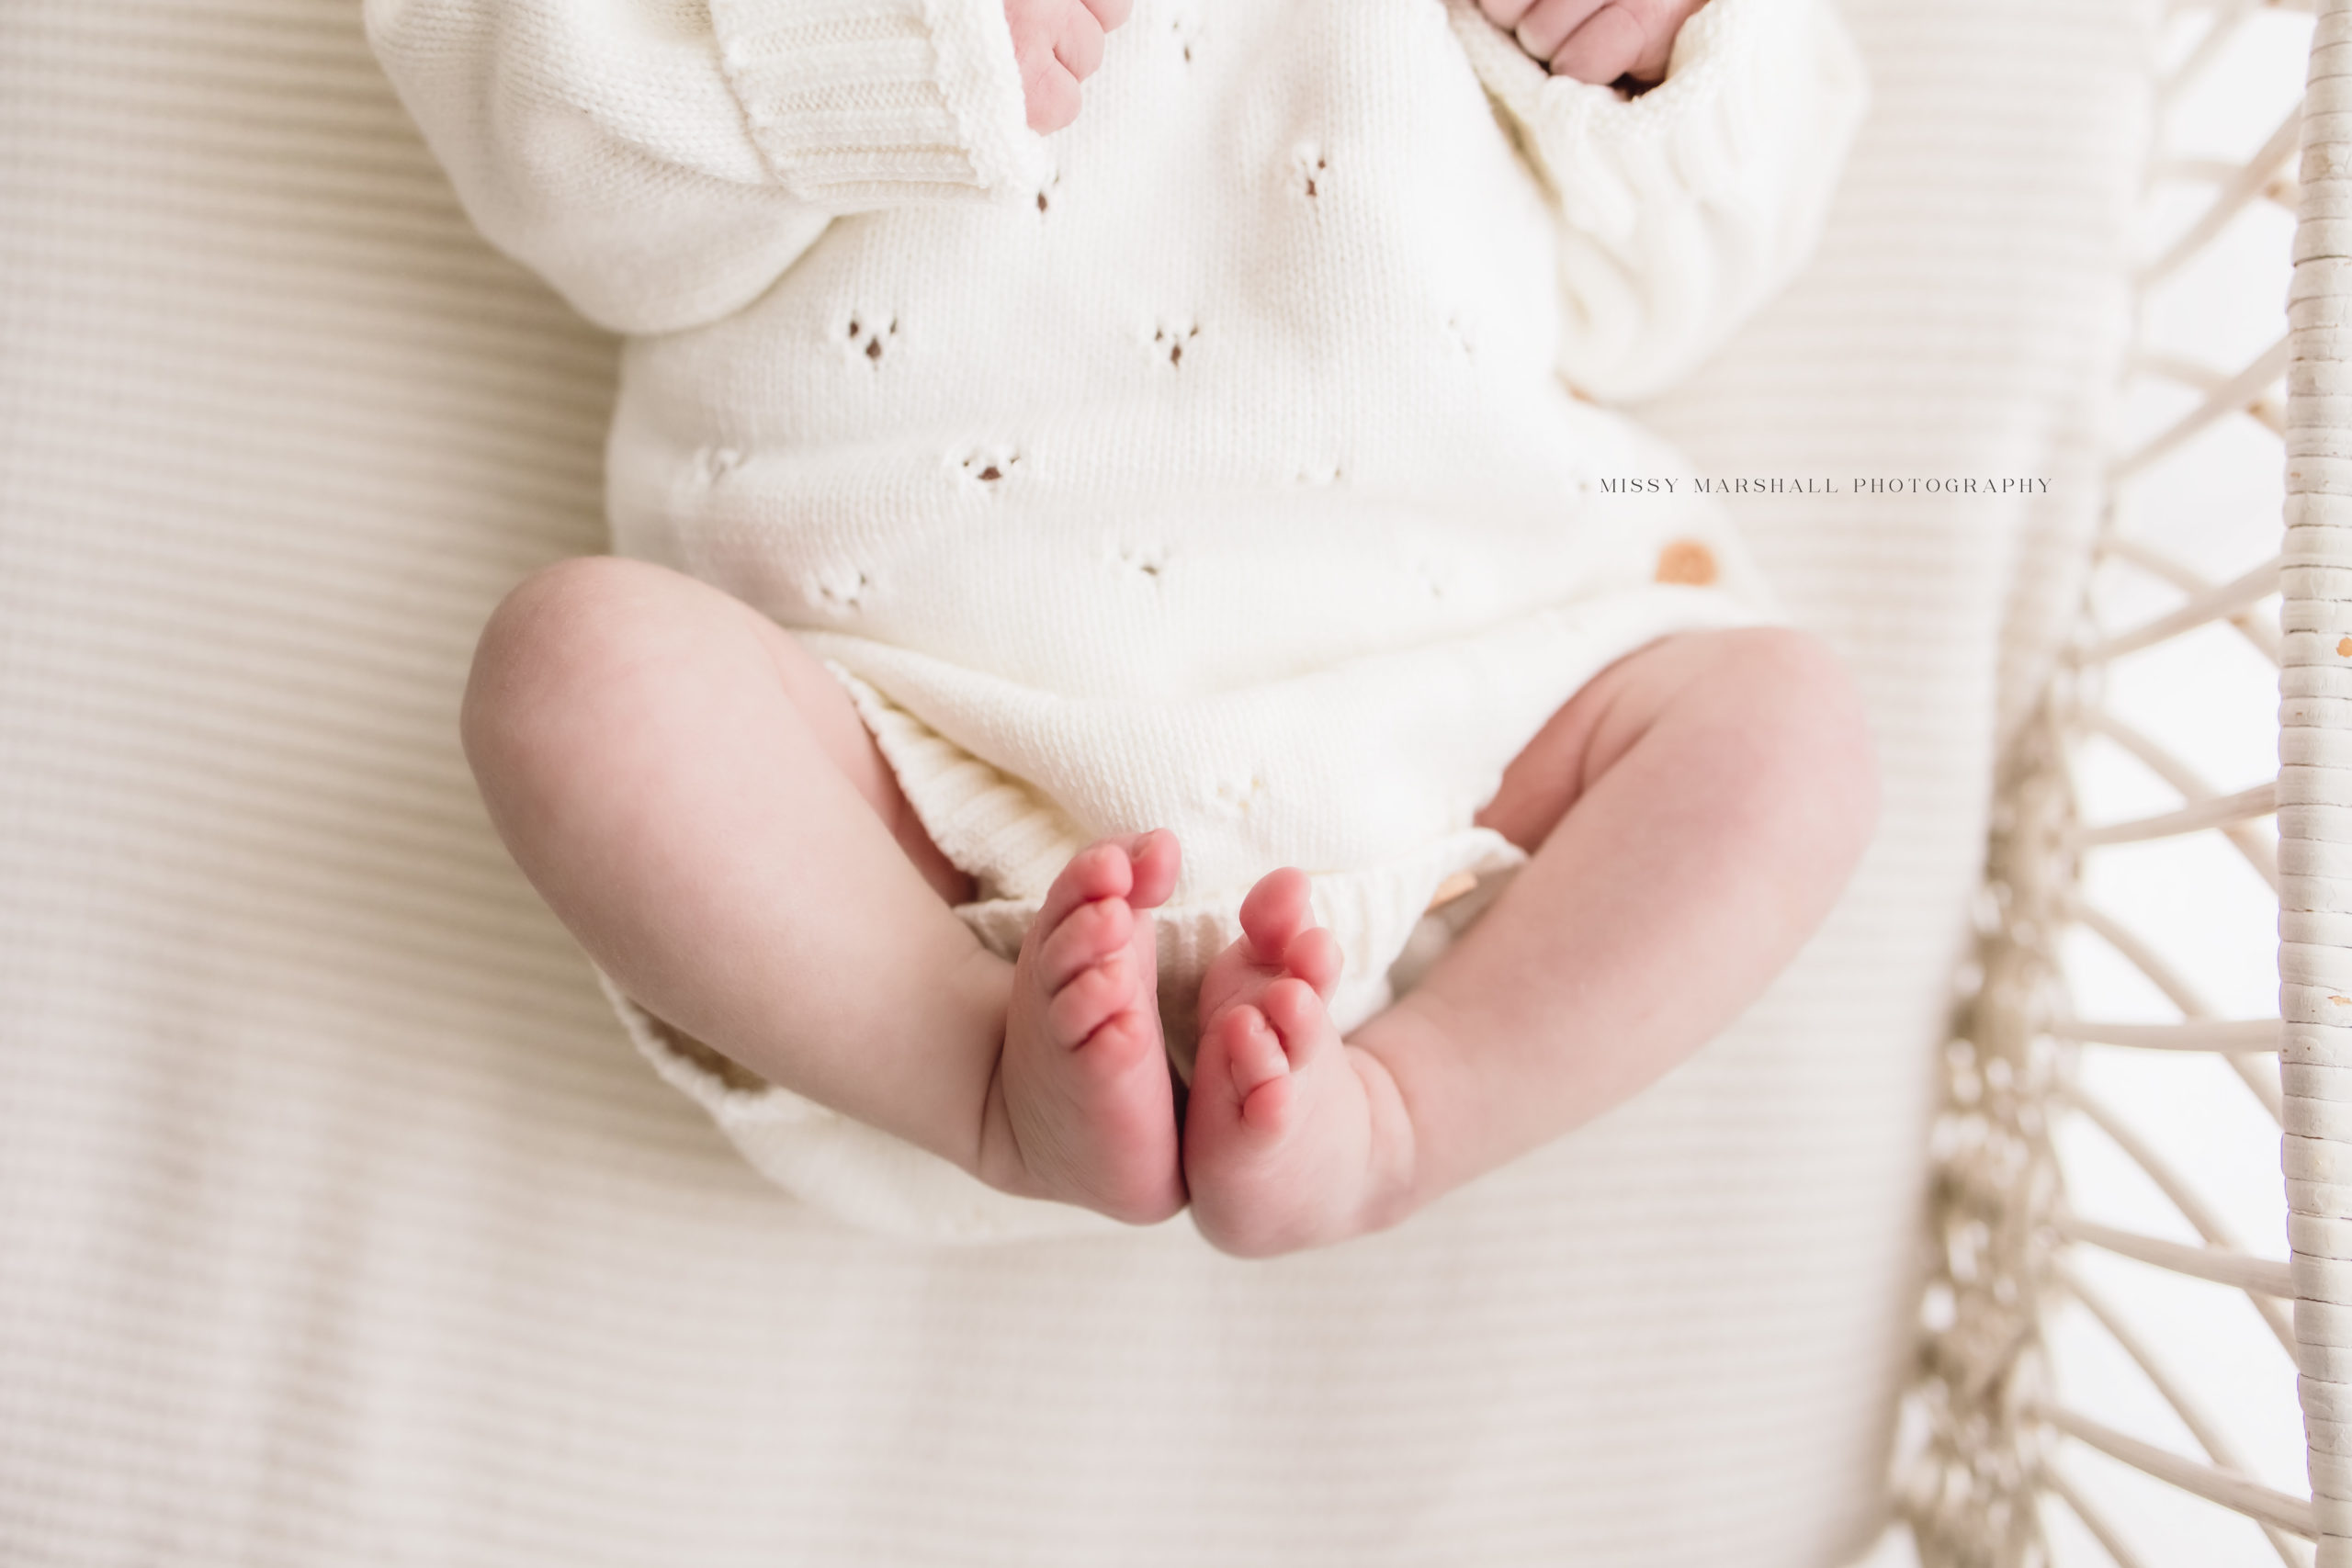 Newborn baby girl's little feet as she lays in a white bassinet wearing a white sweater taken by one of the newborn photographers in louisville